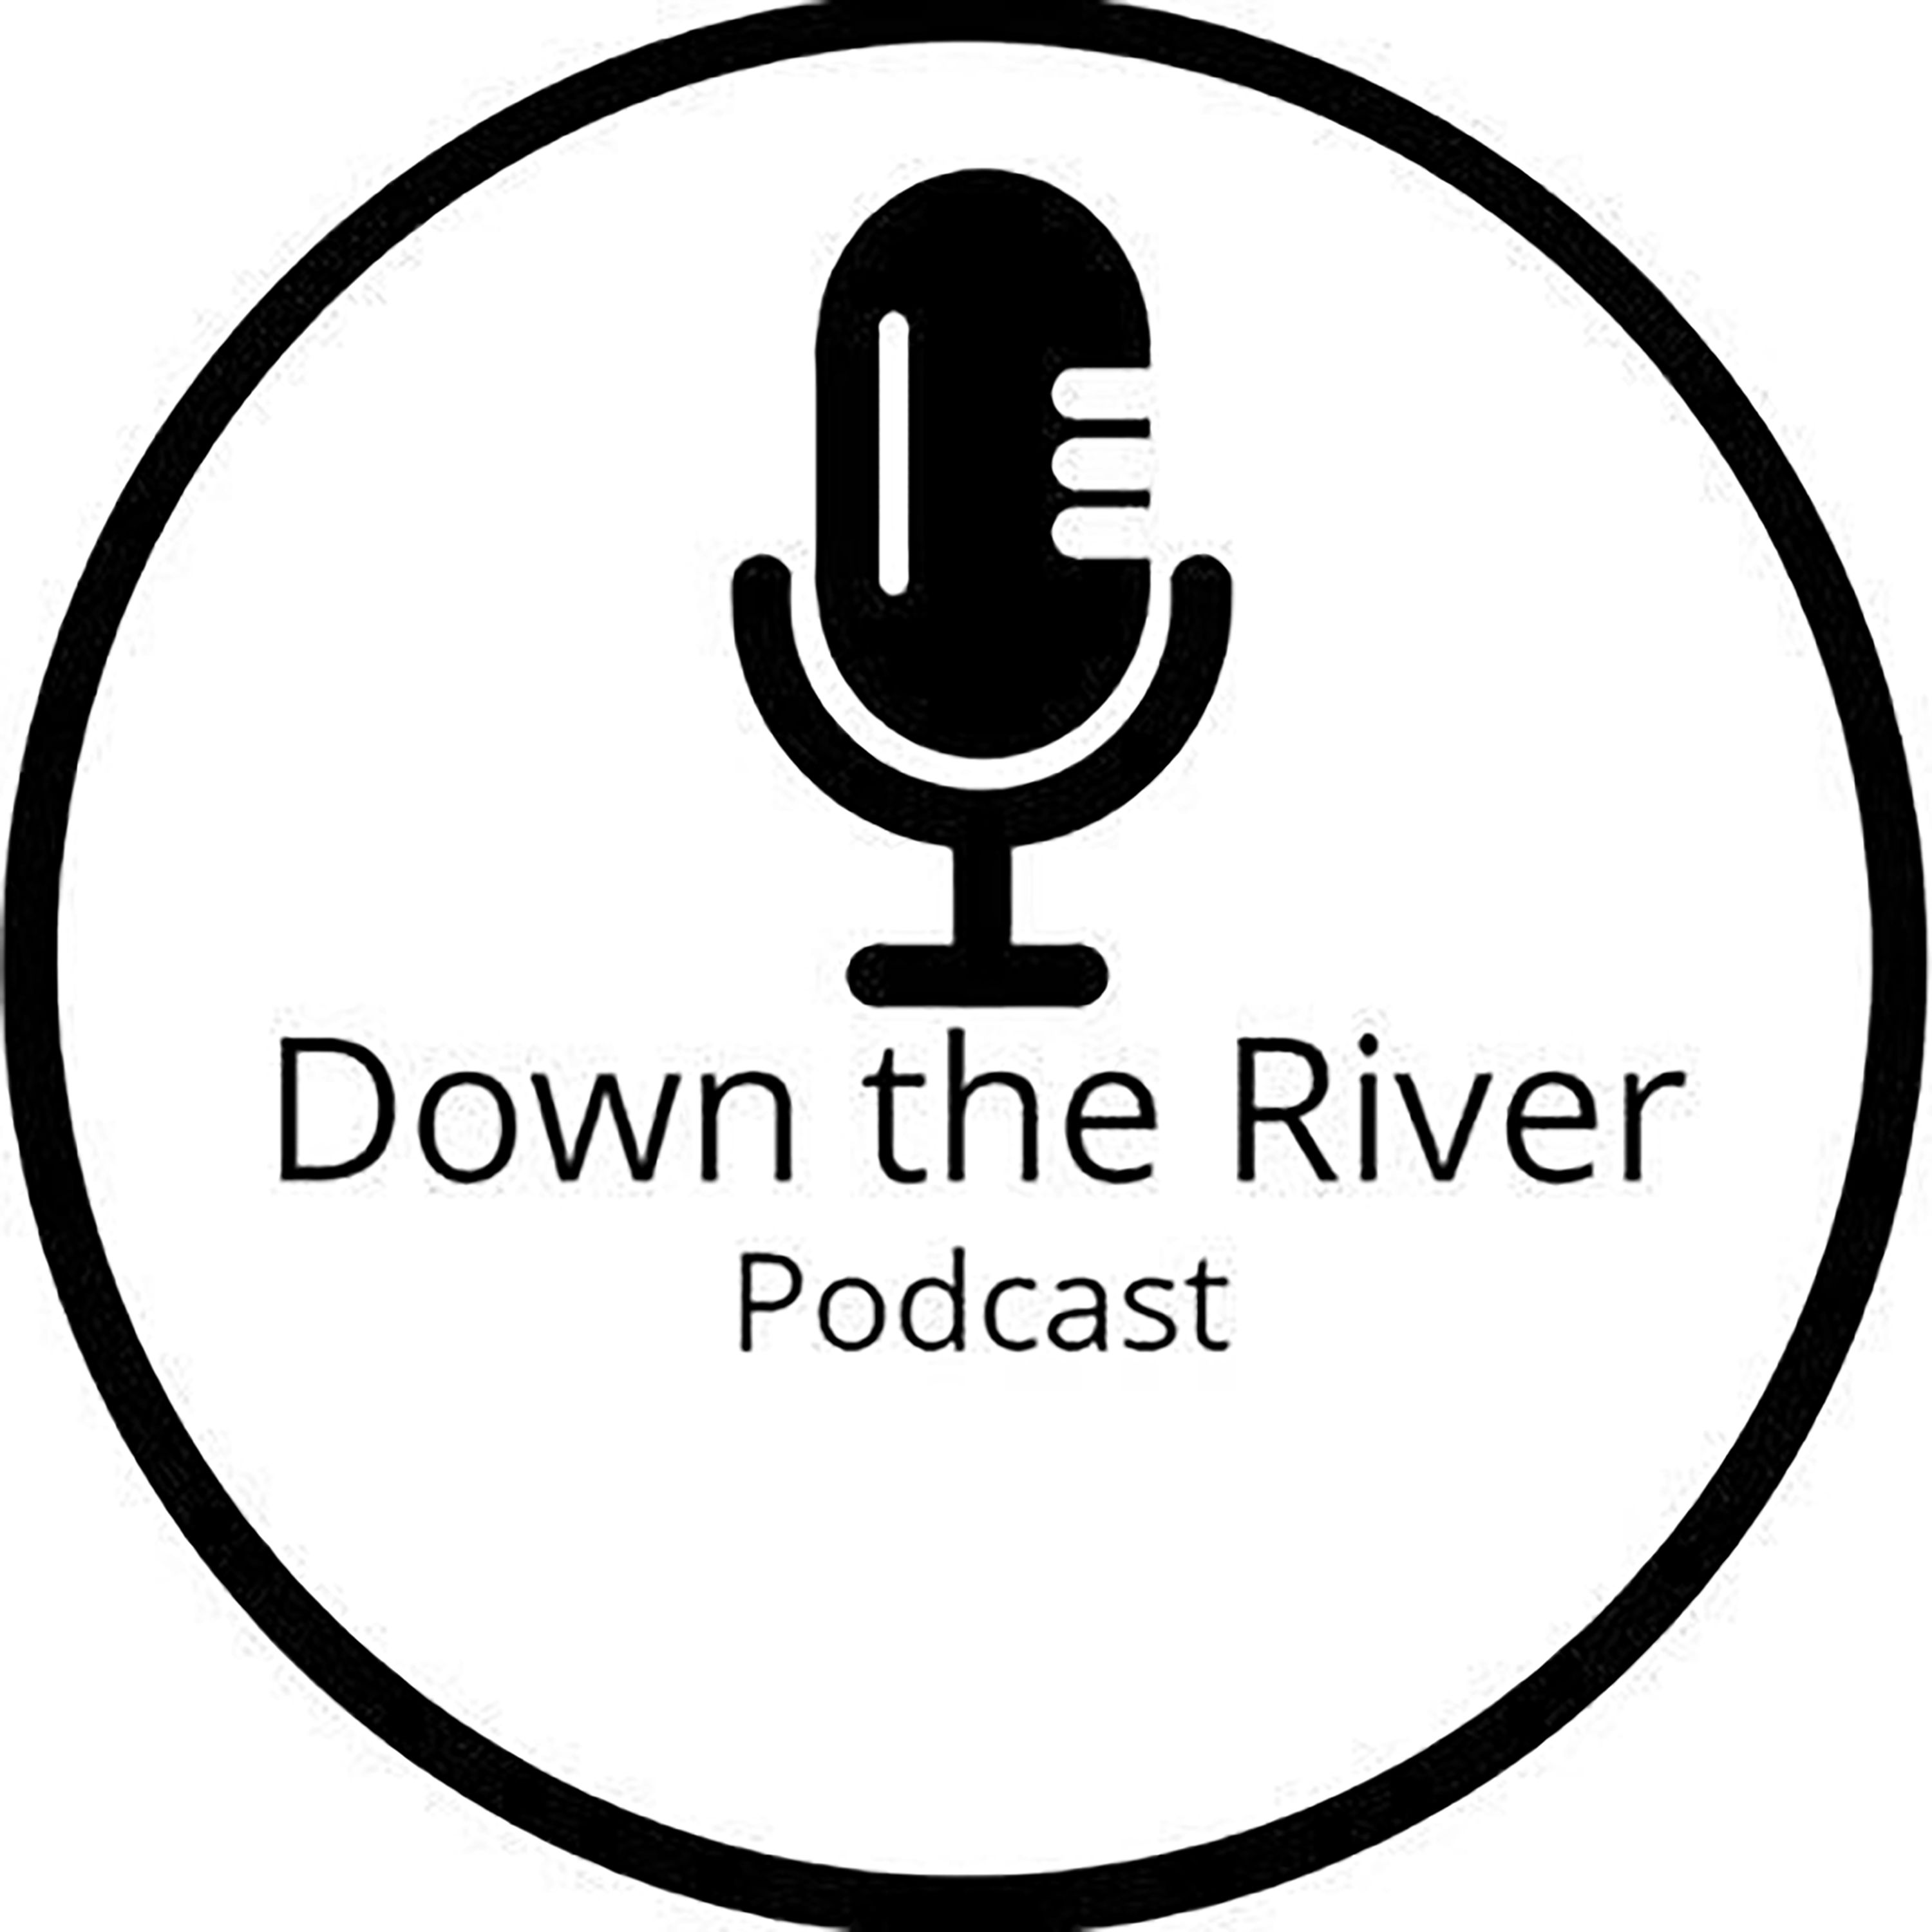 Down the River Podcast